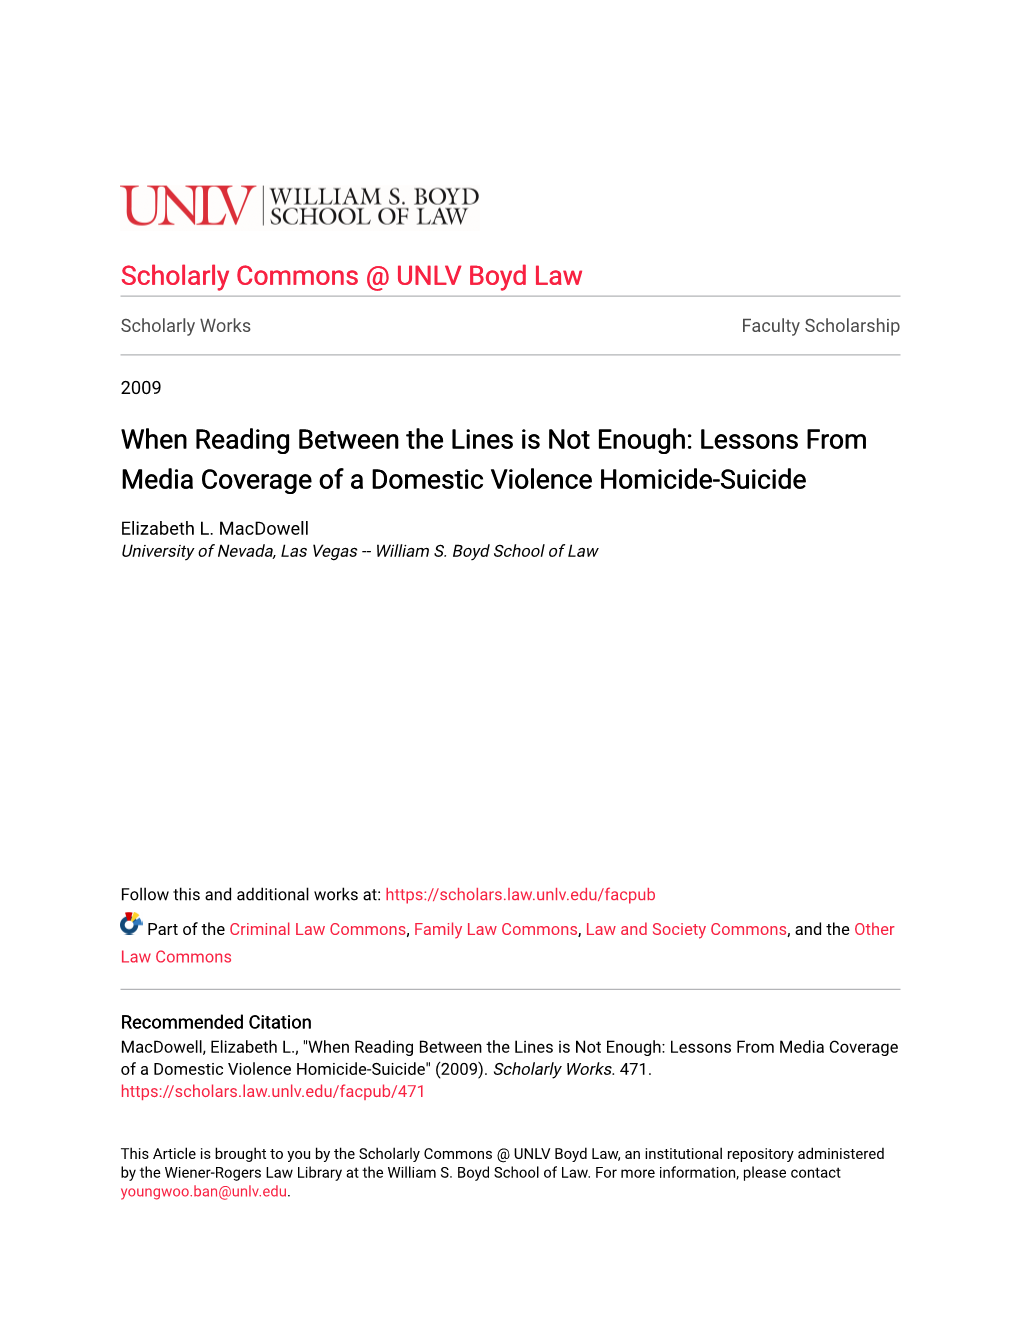 Lessons from Media Coverage of a Domestic Violence Homicide-Suicide